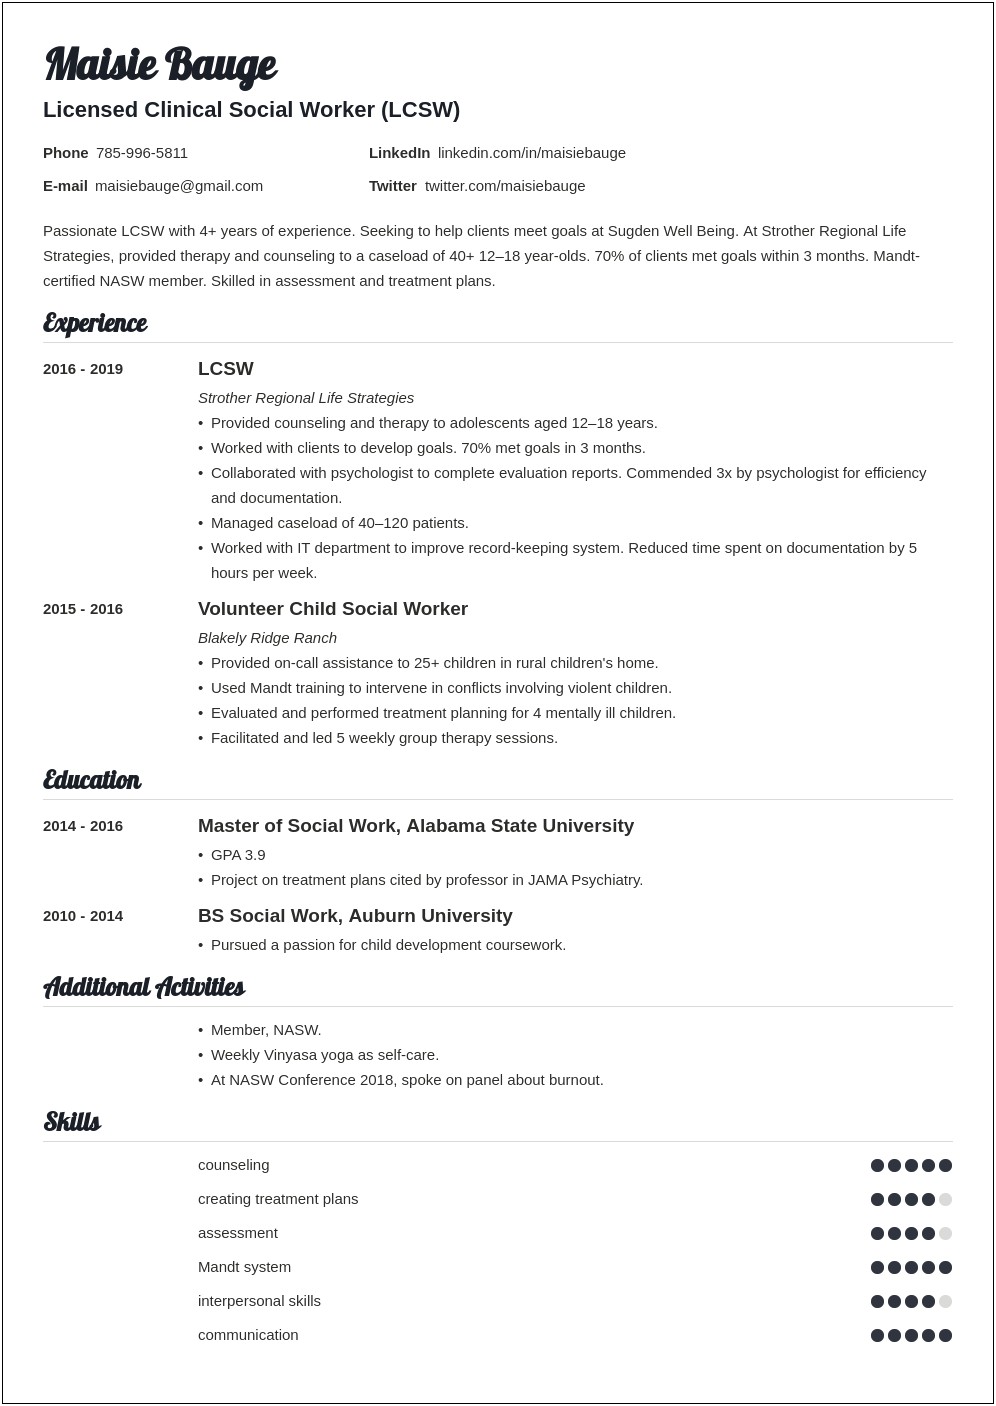 Resume For Social Worker With Experience